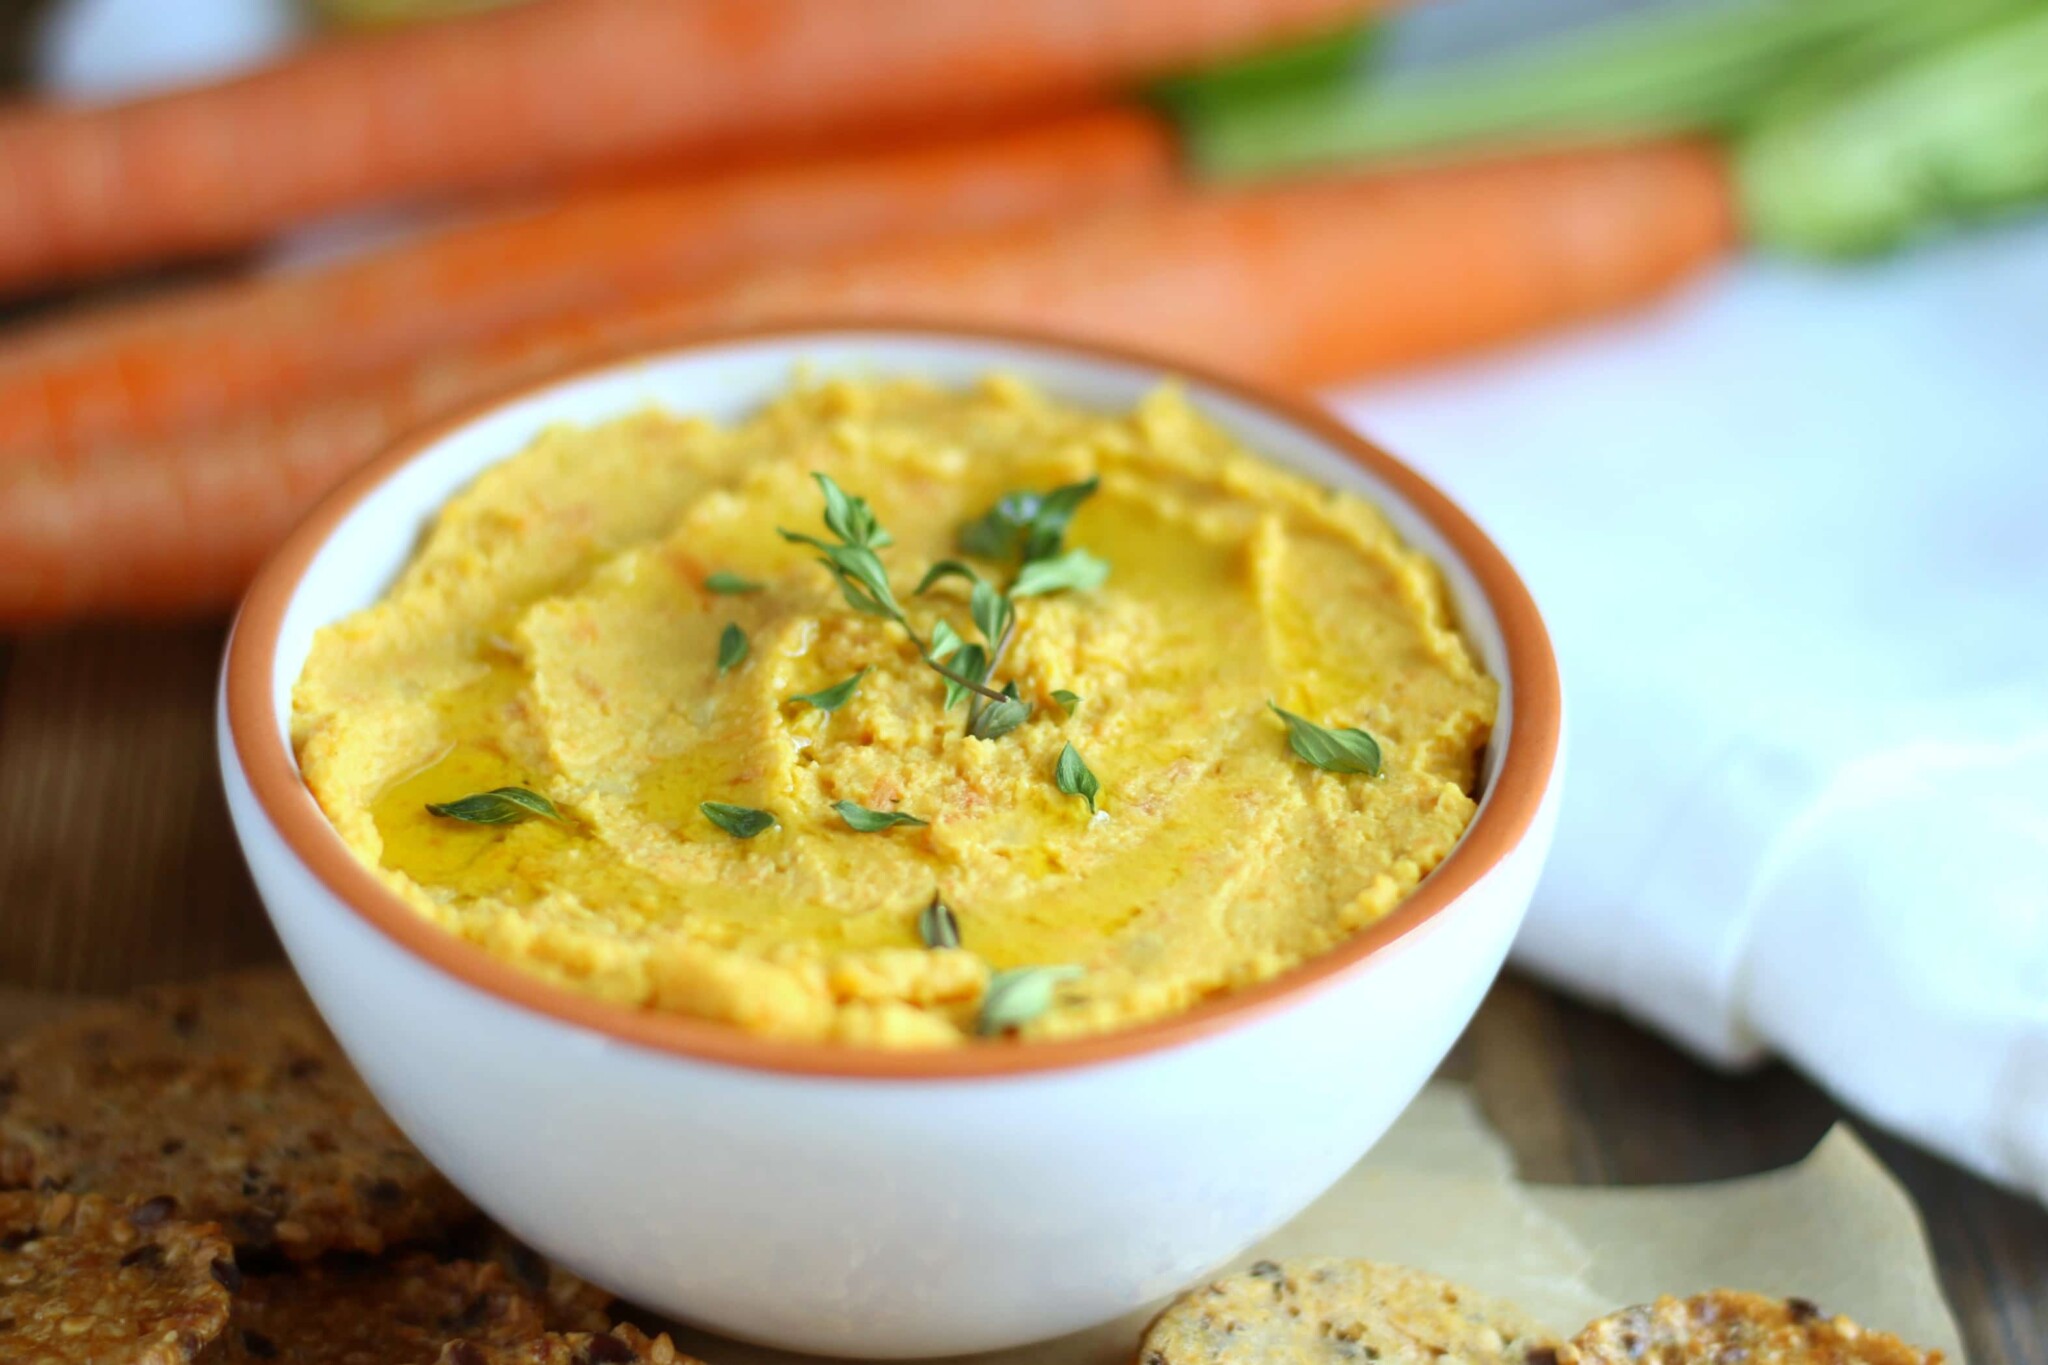 hese hummus recipes were created with you in mind focusing on your dietary needs without compromising the flavor, consistency and overall satisfaction that we all look for in a good hummus.